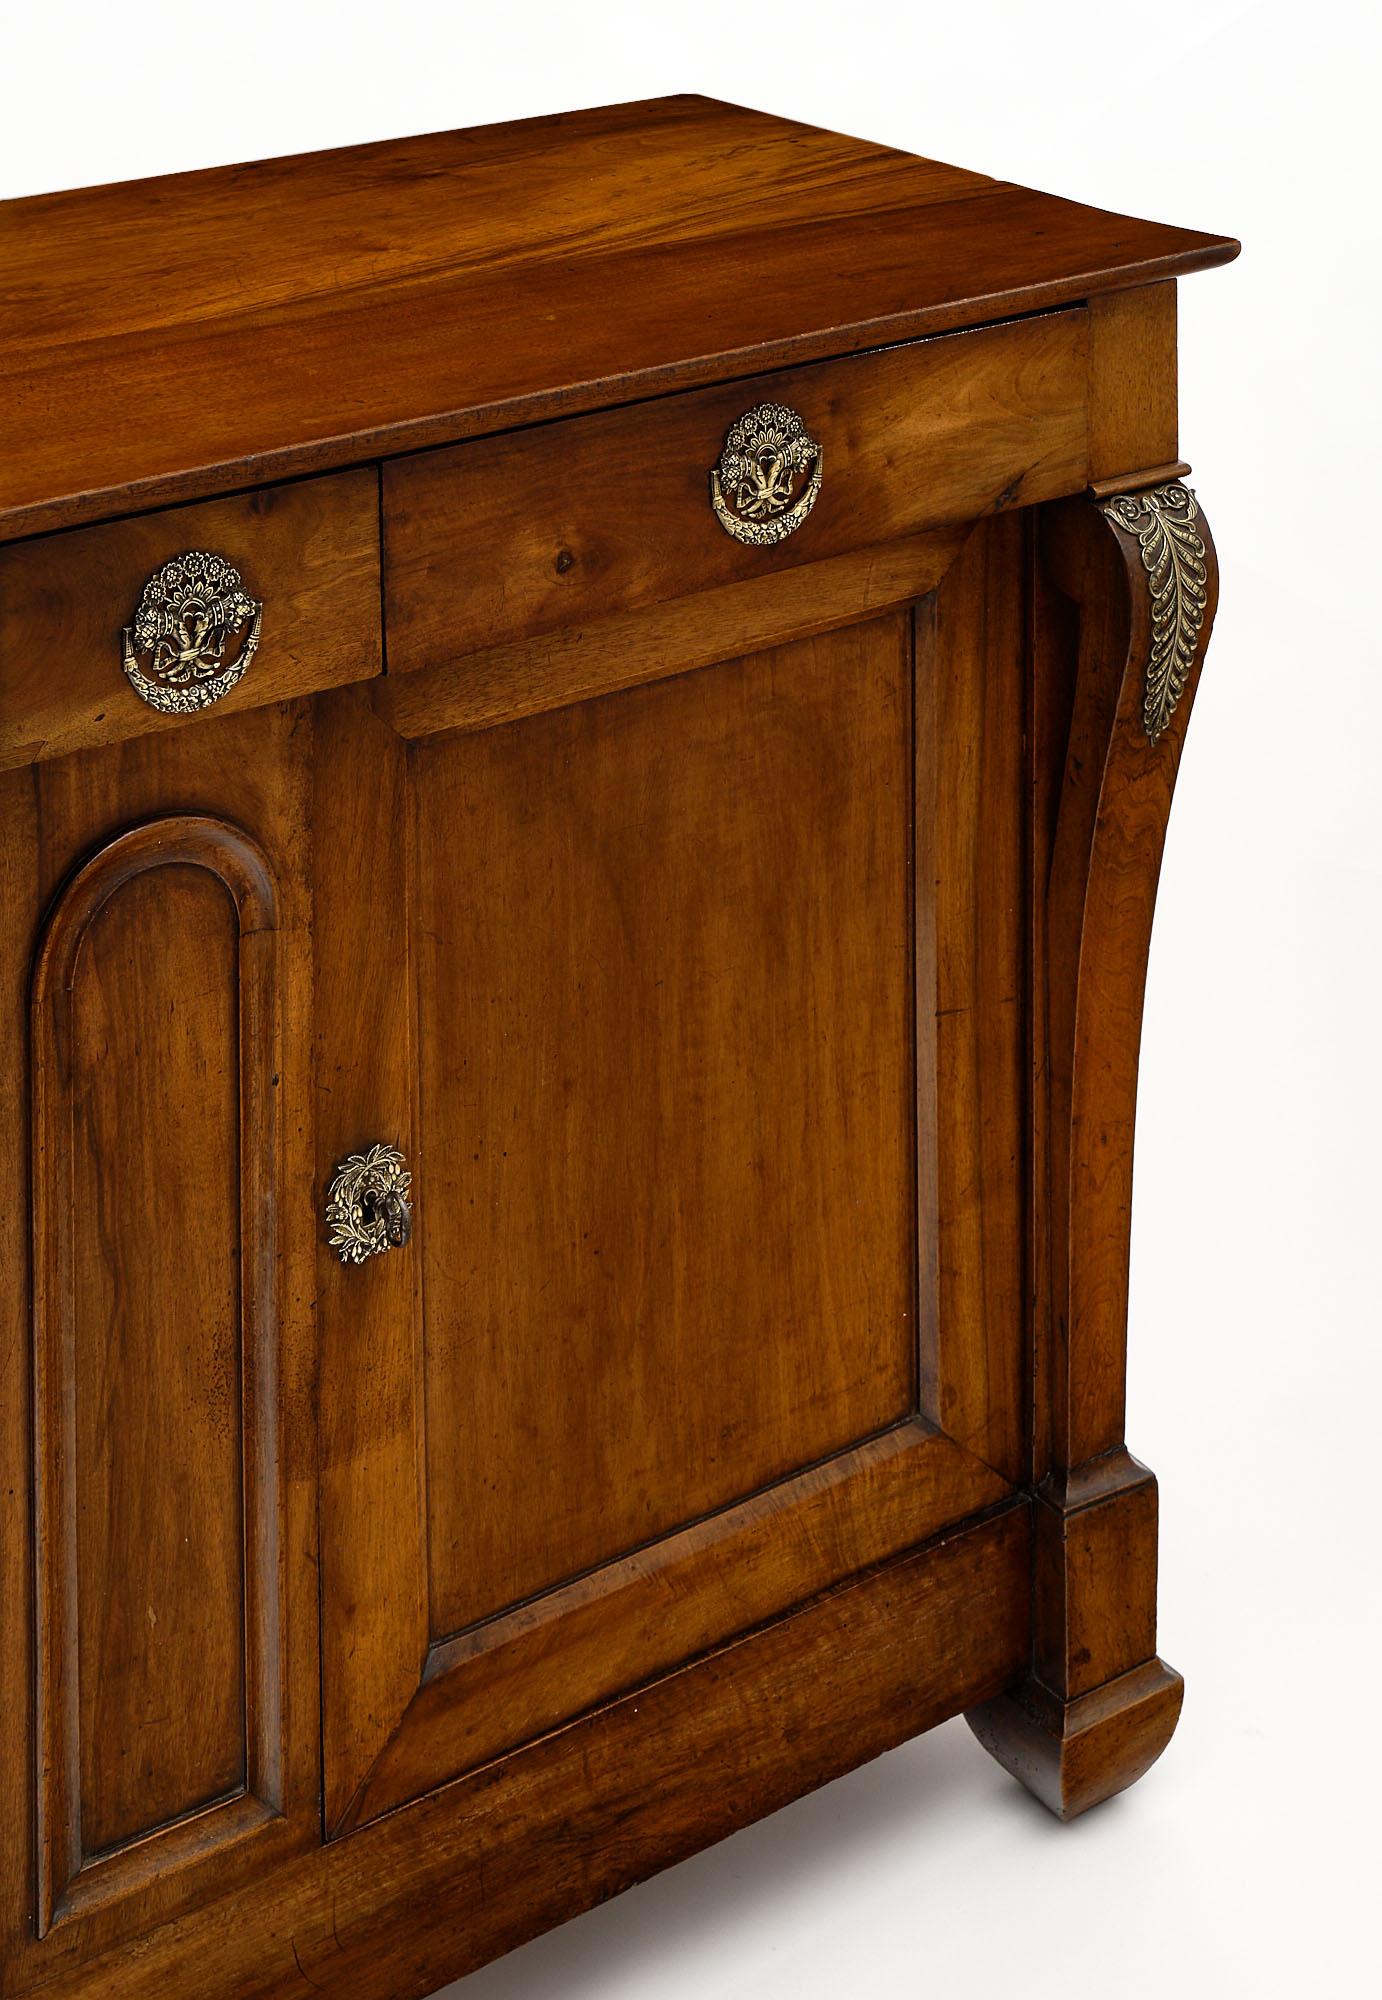 Early 19th Century French Restauration Period Buffet